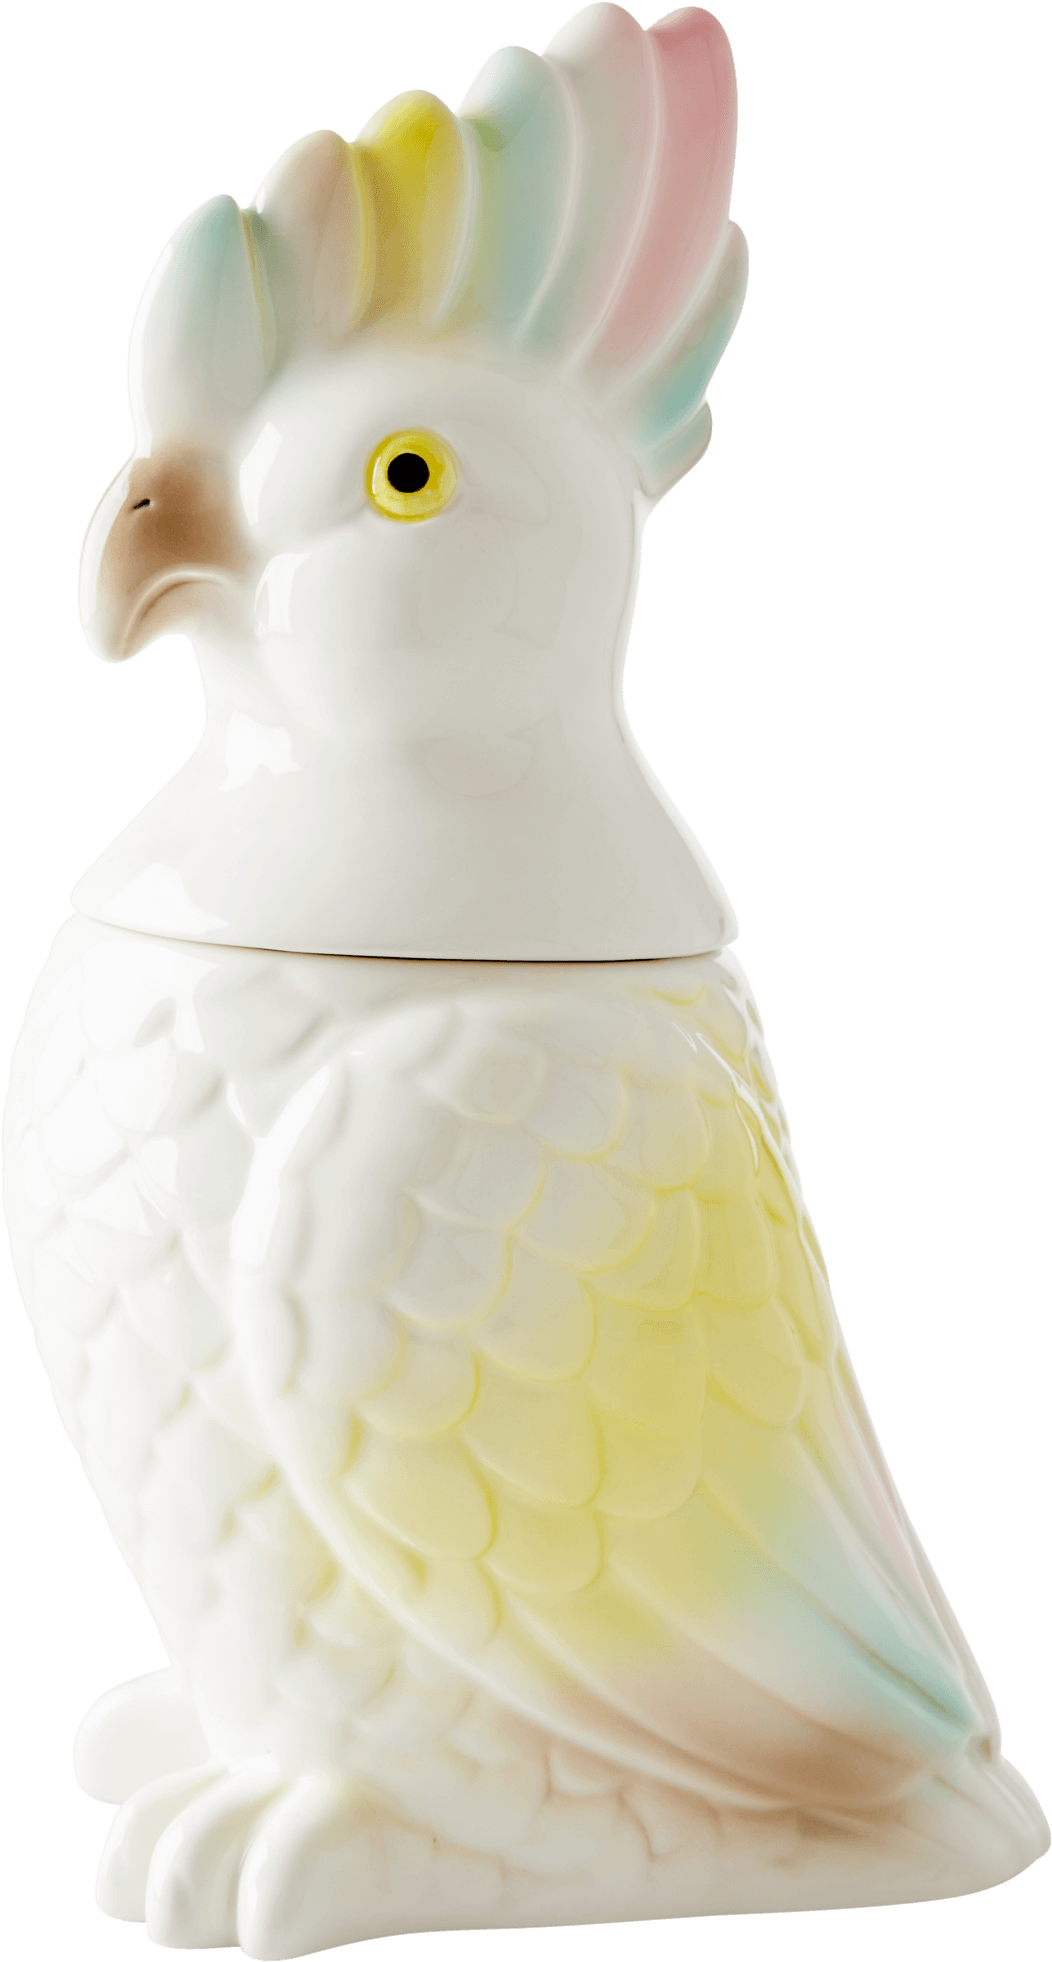 A White And Yellow Bird Shaped Cookie Jar